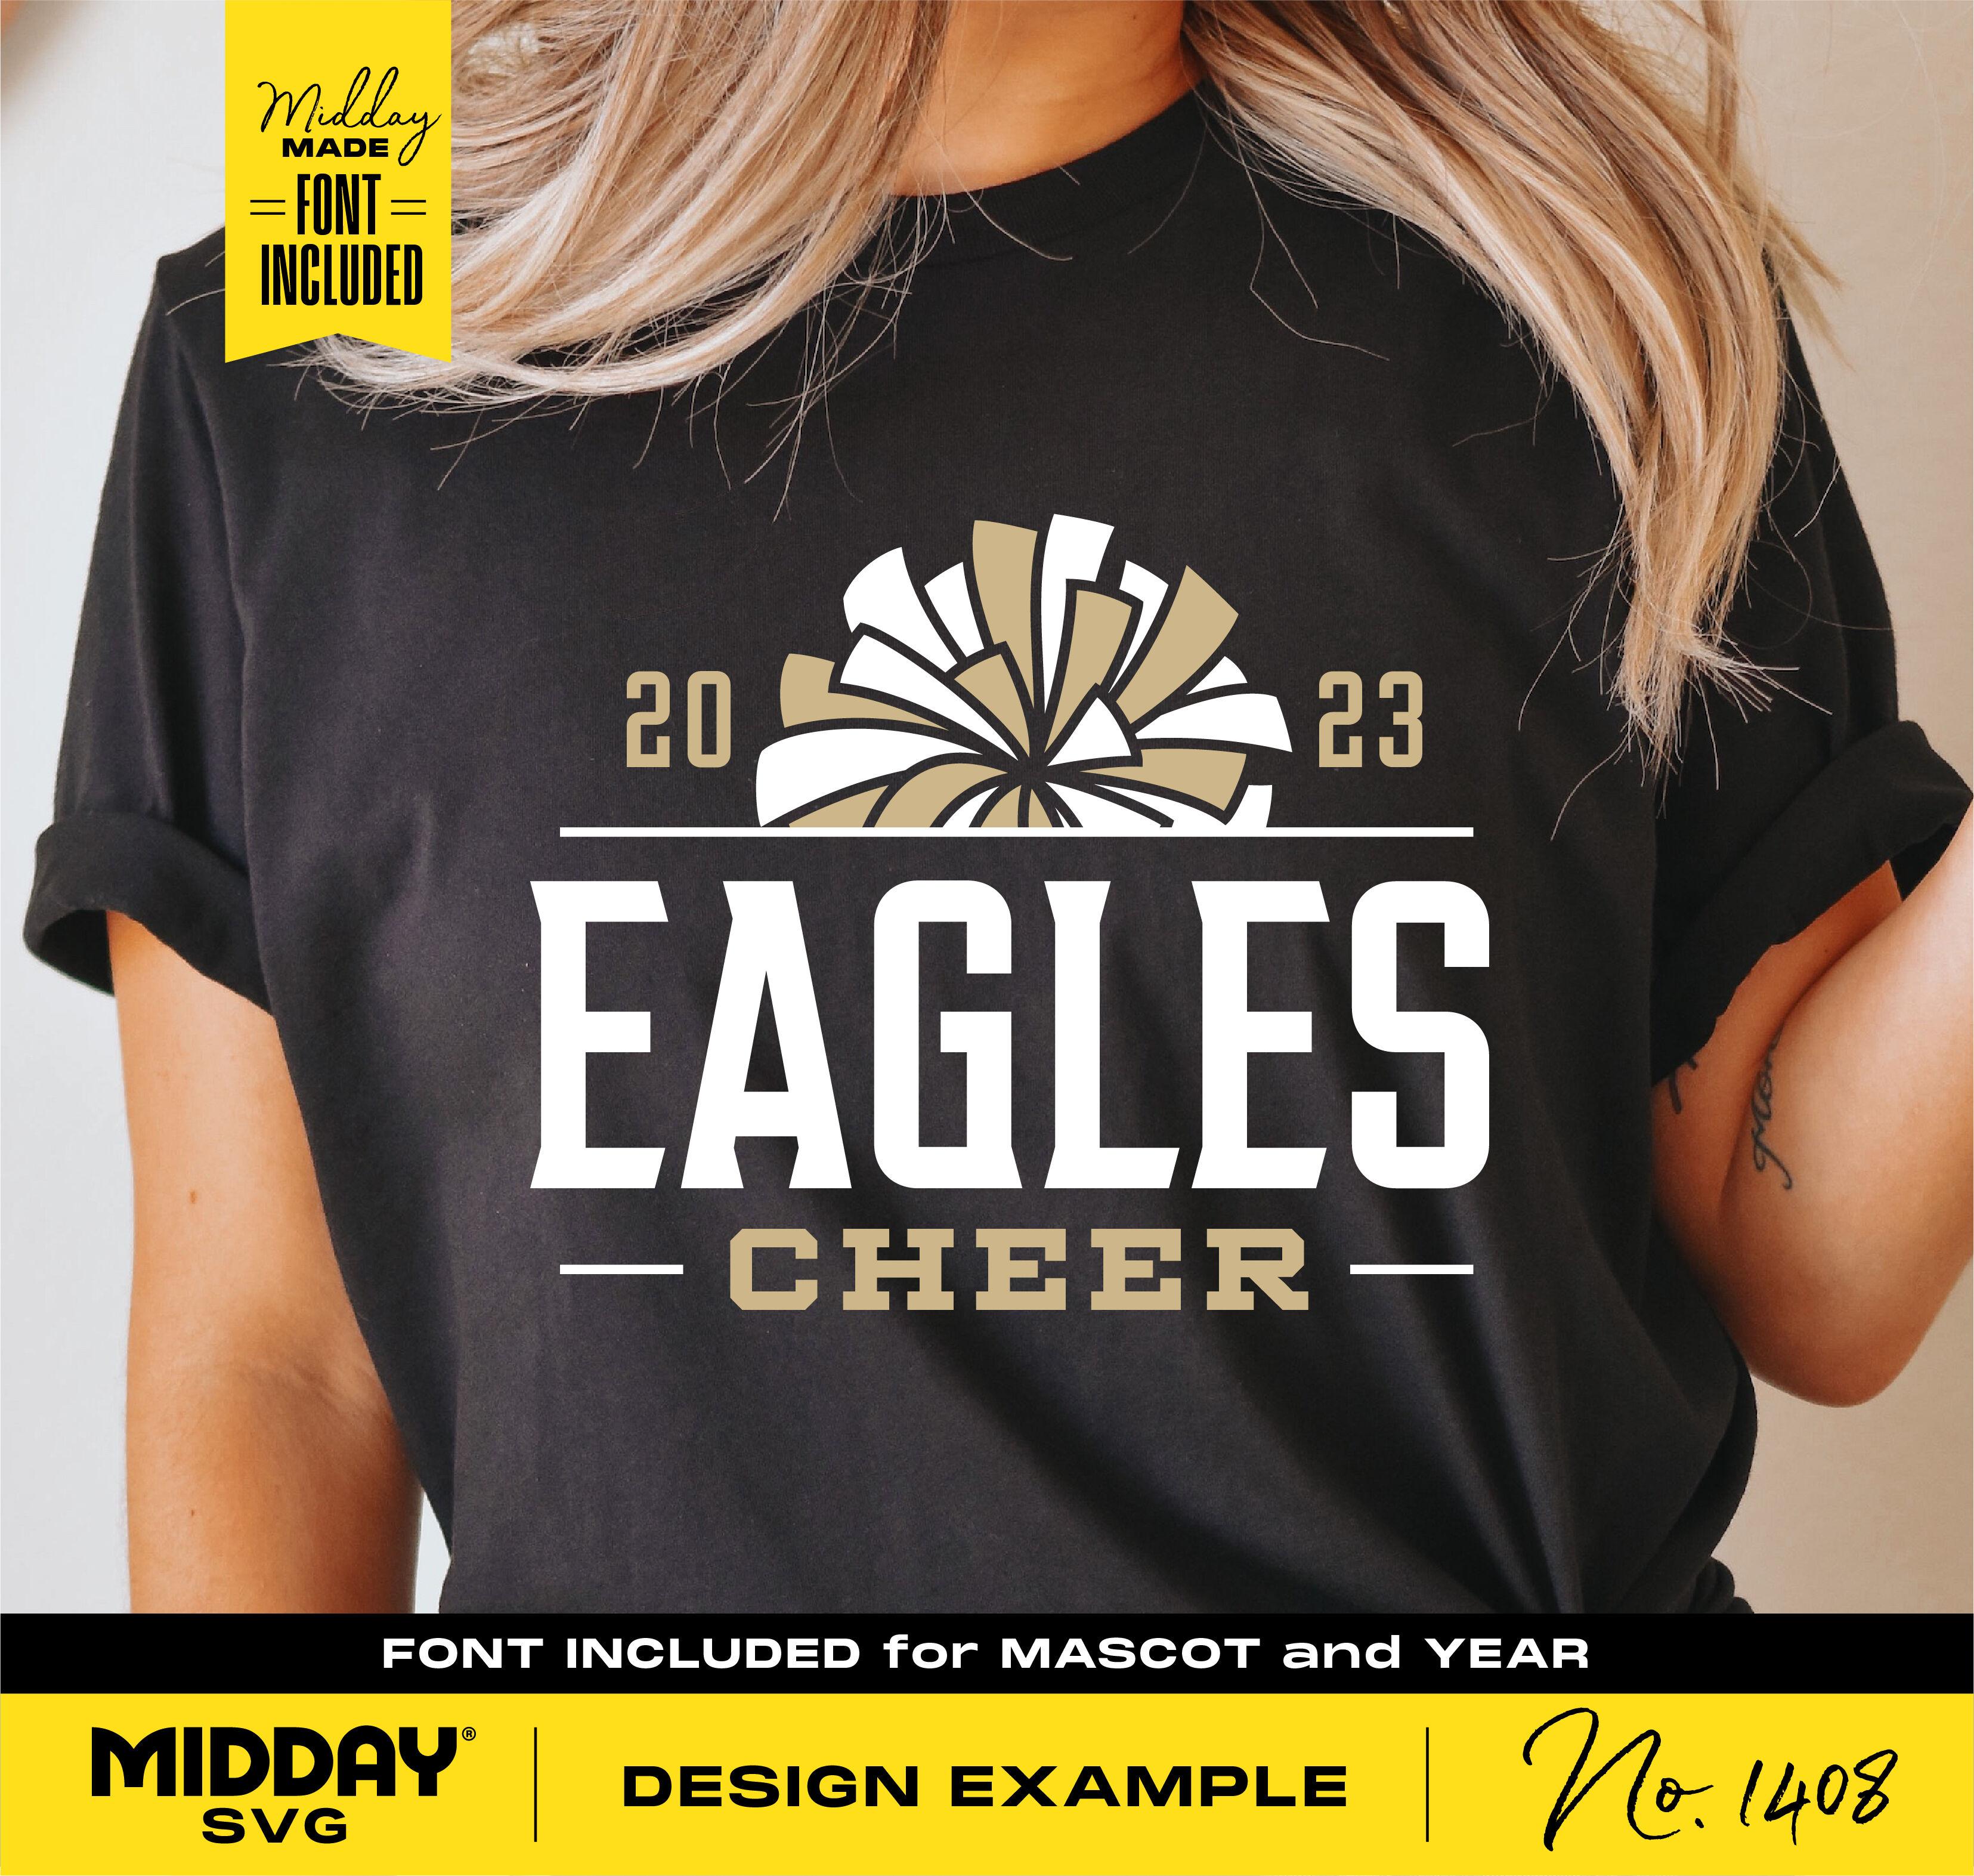 Cheer Team Template, Svg Png Dxf Eps, Cheerleader Team Shirts, Cheer C ...